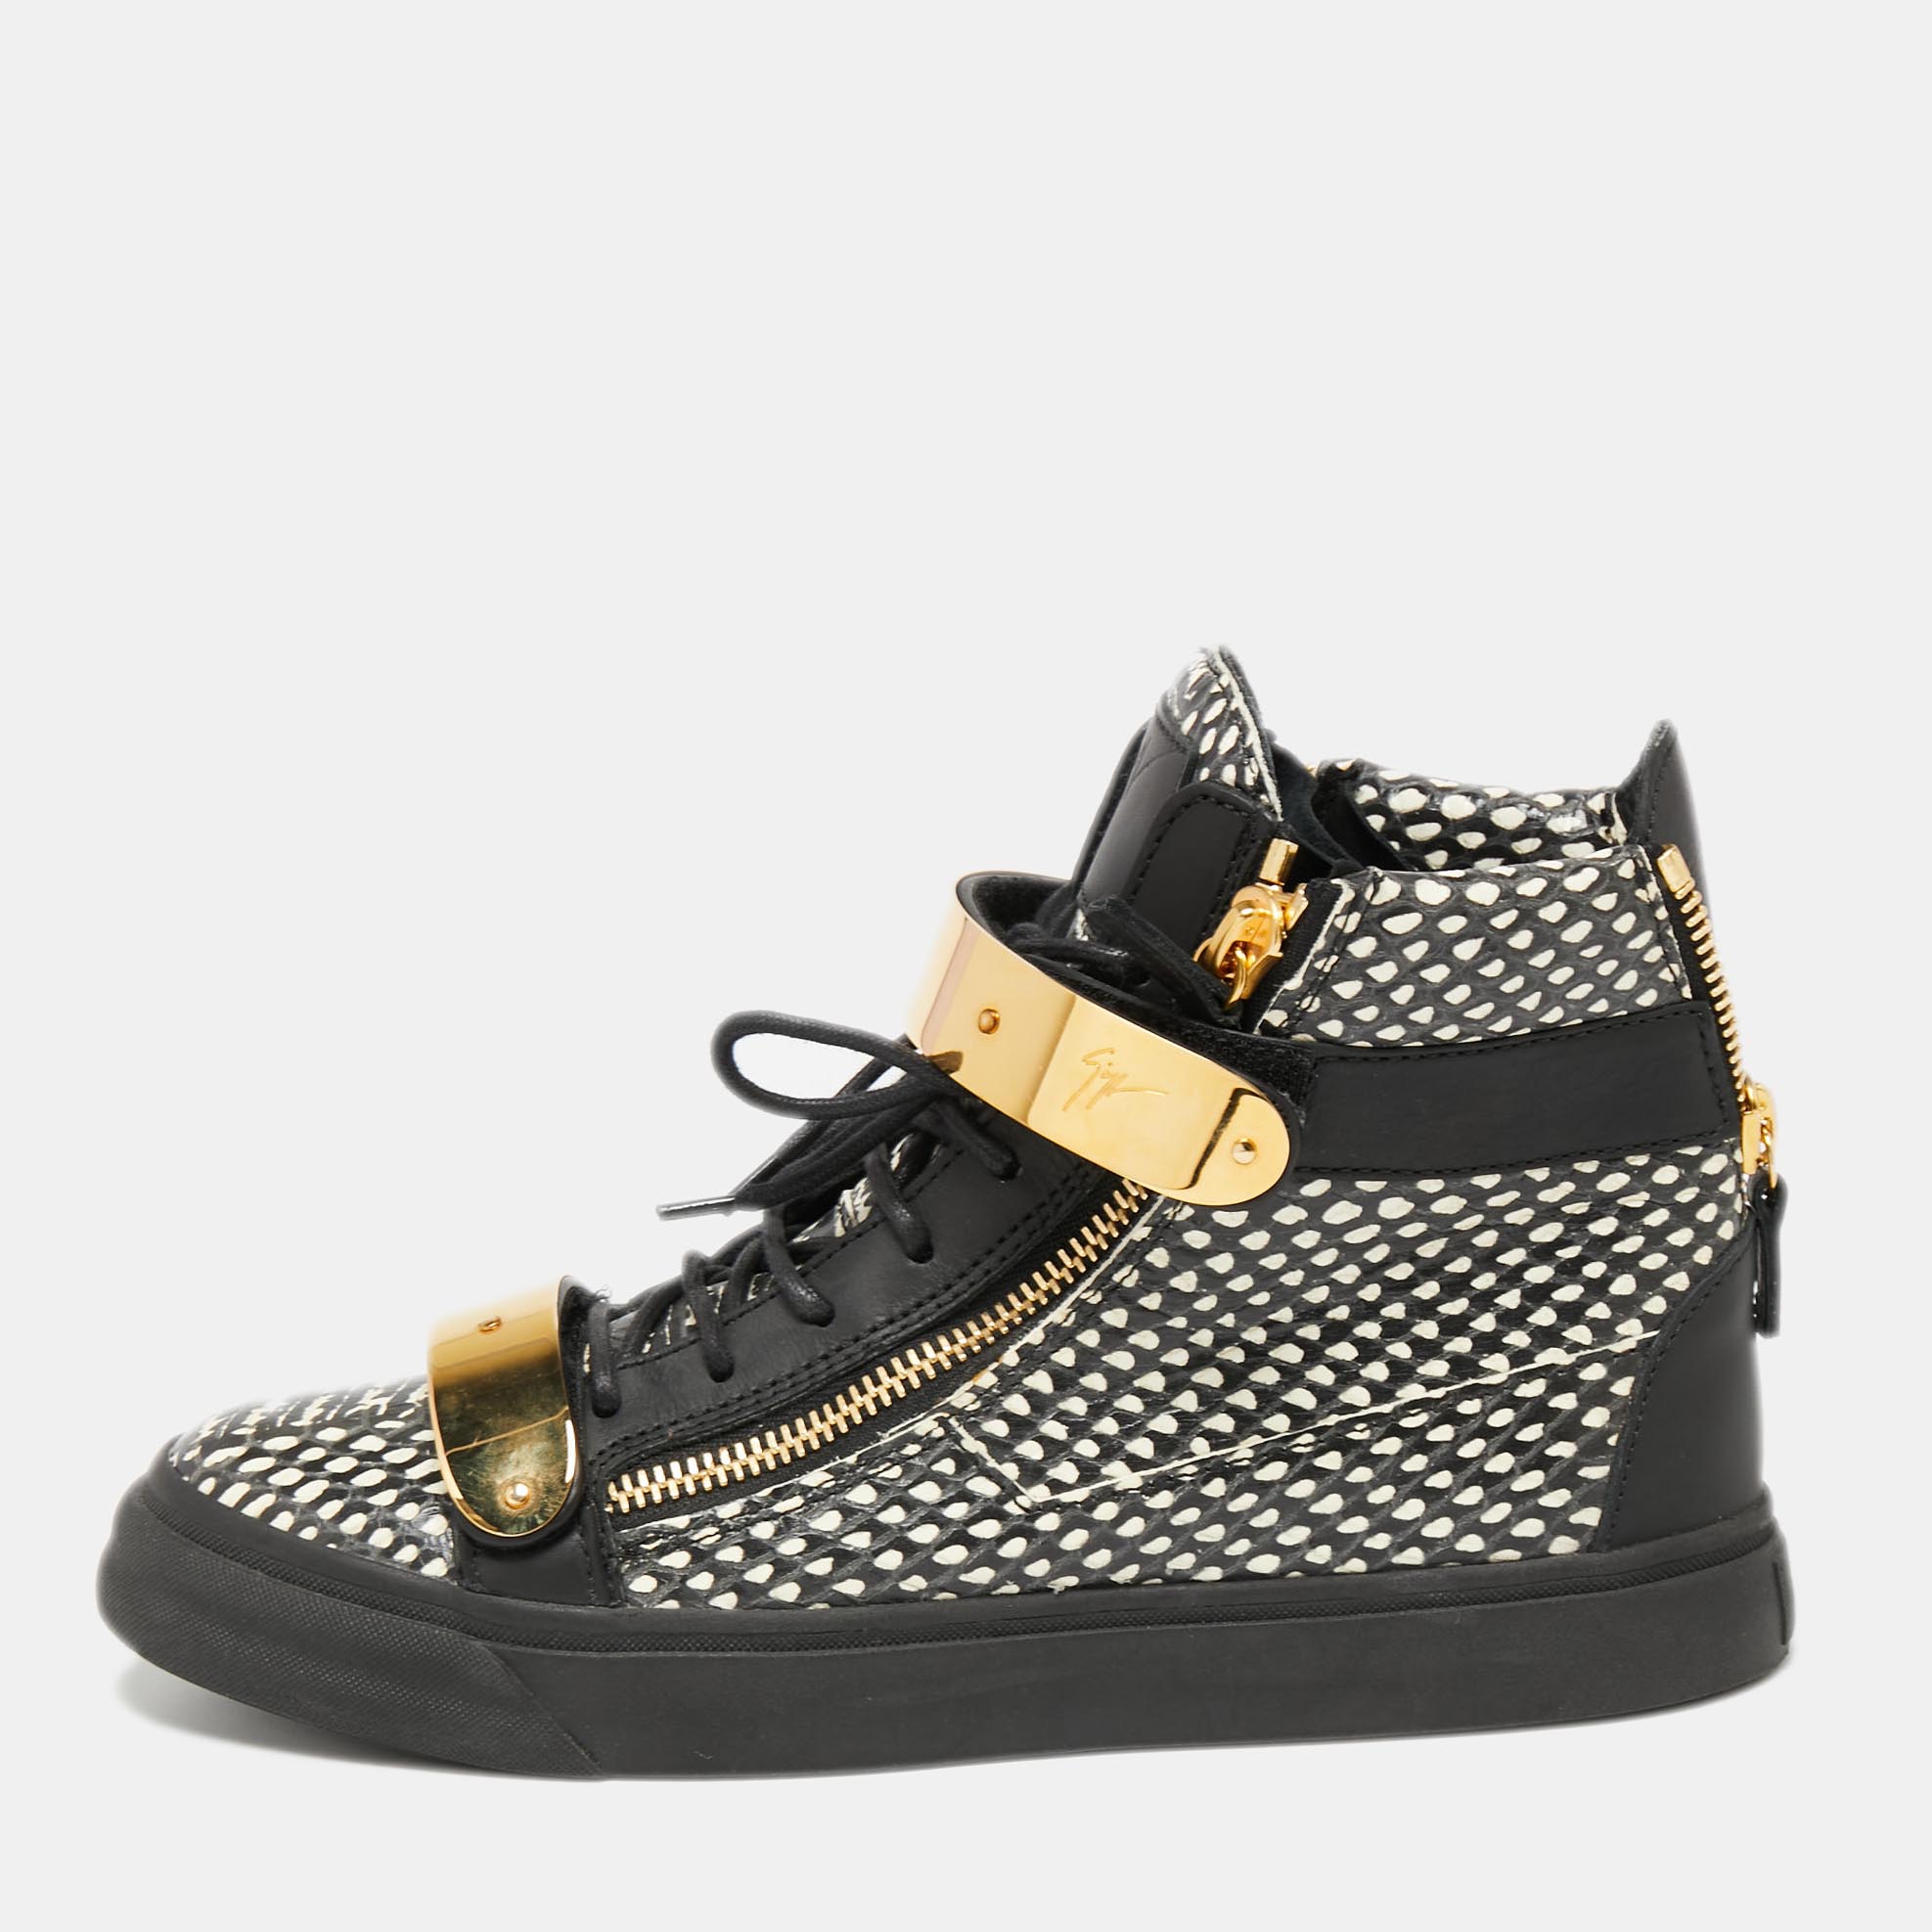 

Giuseppe Zanotti Black/White Snakeskin Embossed And Leather High Top Double Zip Sneakers Size